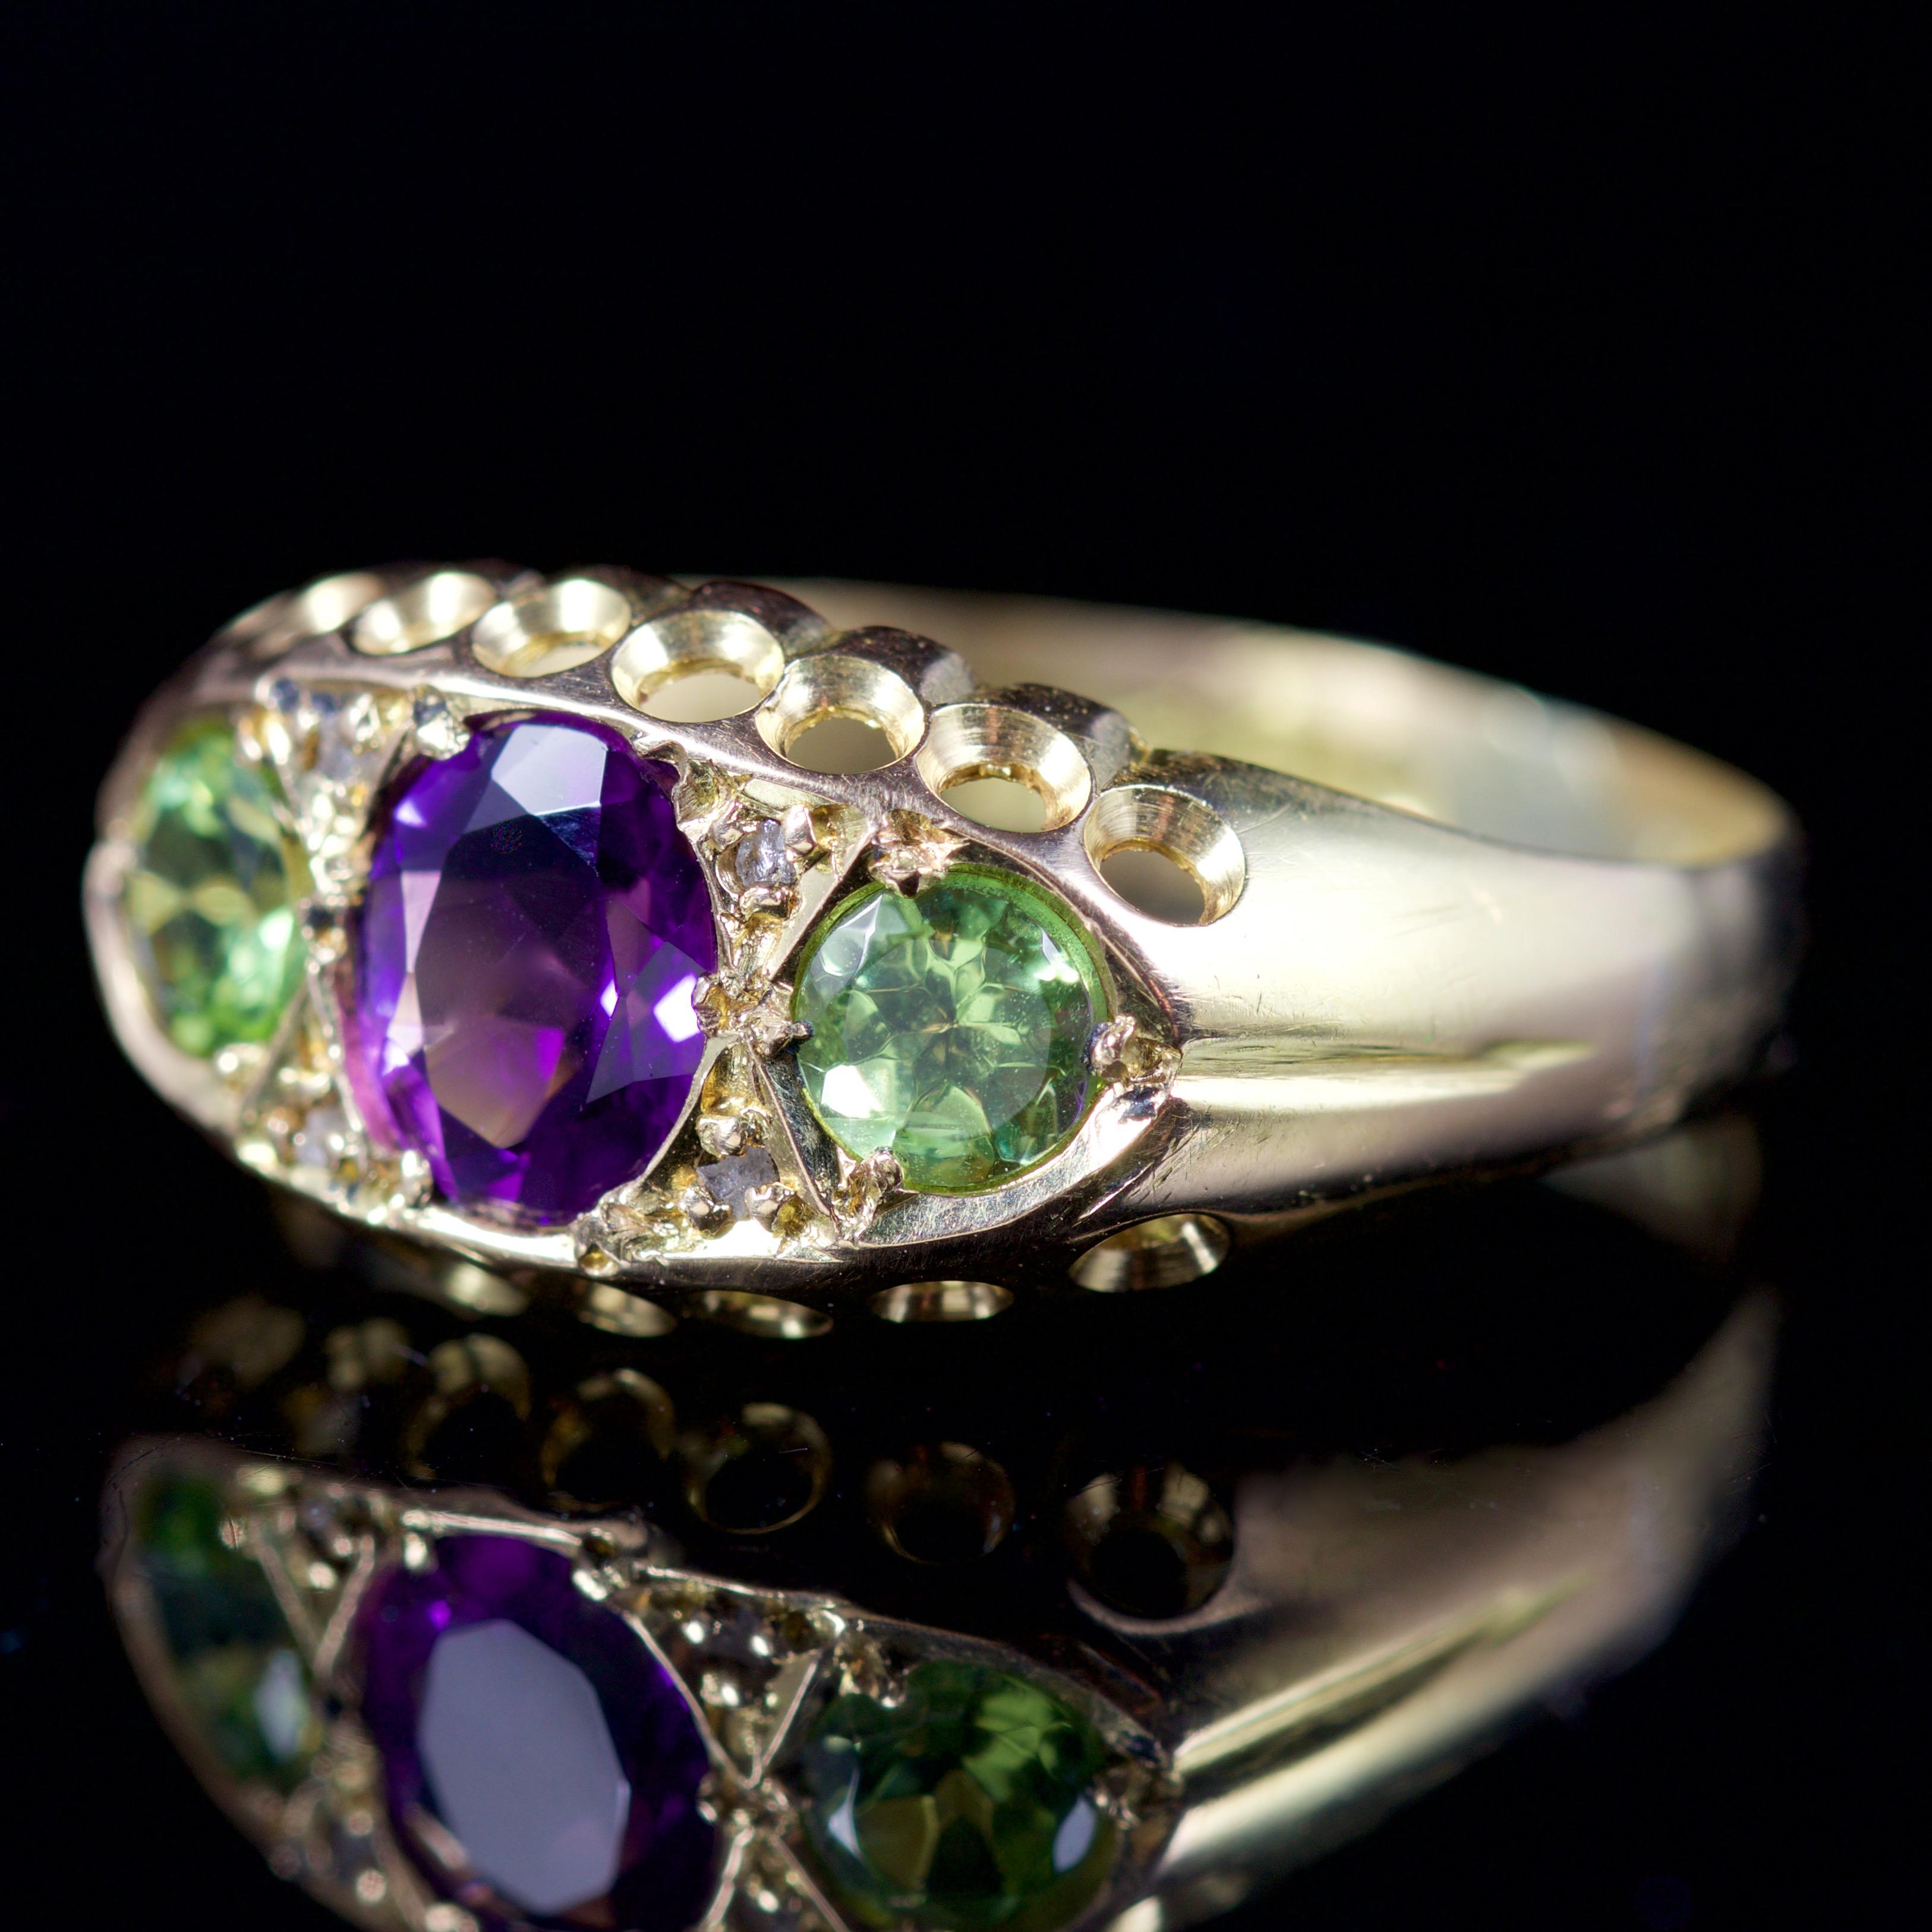 This fabulous Victorian Suffragette ring is set in 18ct Gold, dated 1912

It boasts an 0.70ct Amethyst in the centre, with two green 0.20ct Peridots and four glistening Diamond set in-between.

The ring is decorated in a beautiful combination of